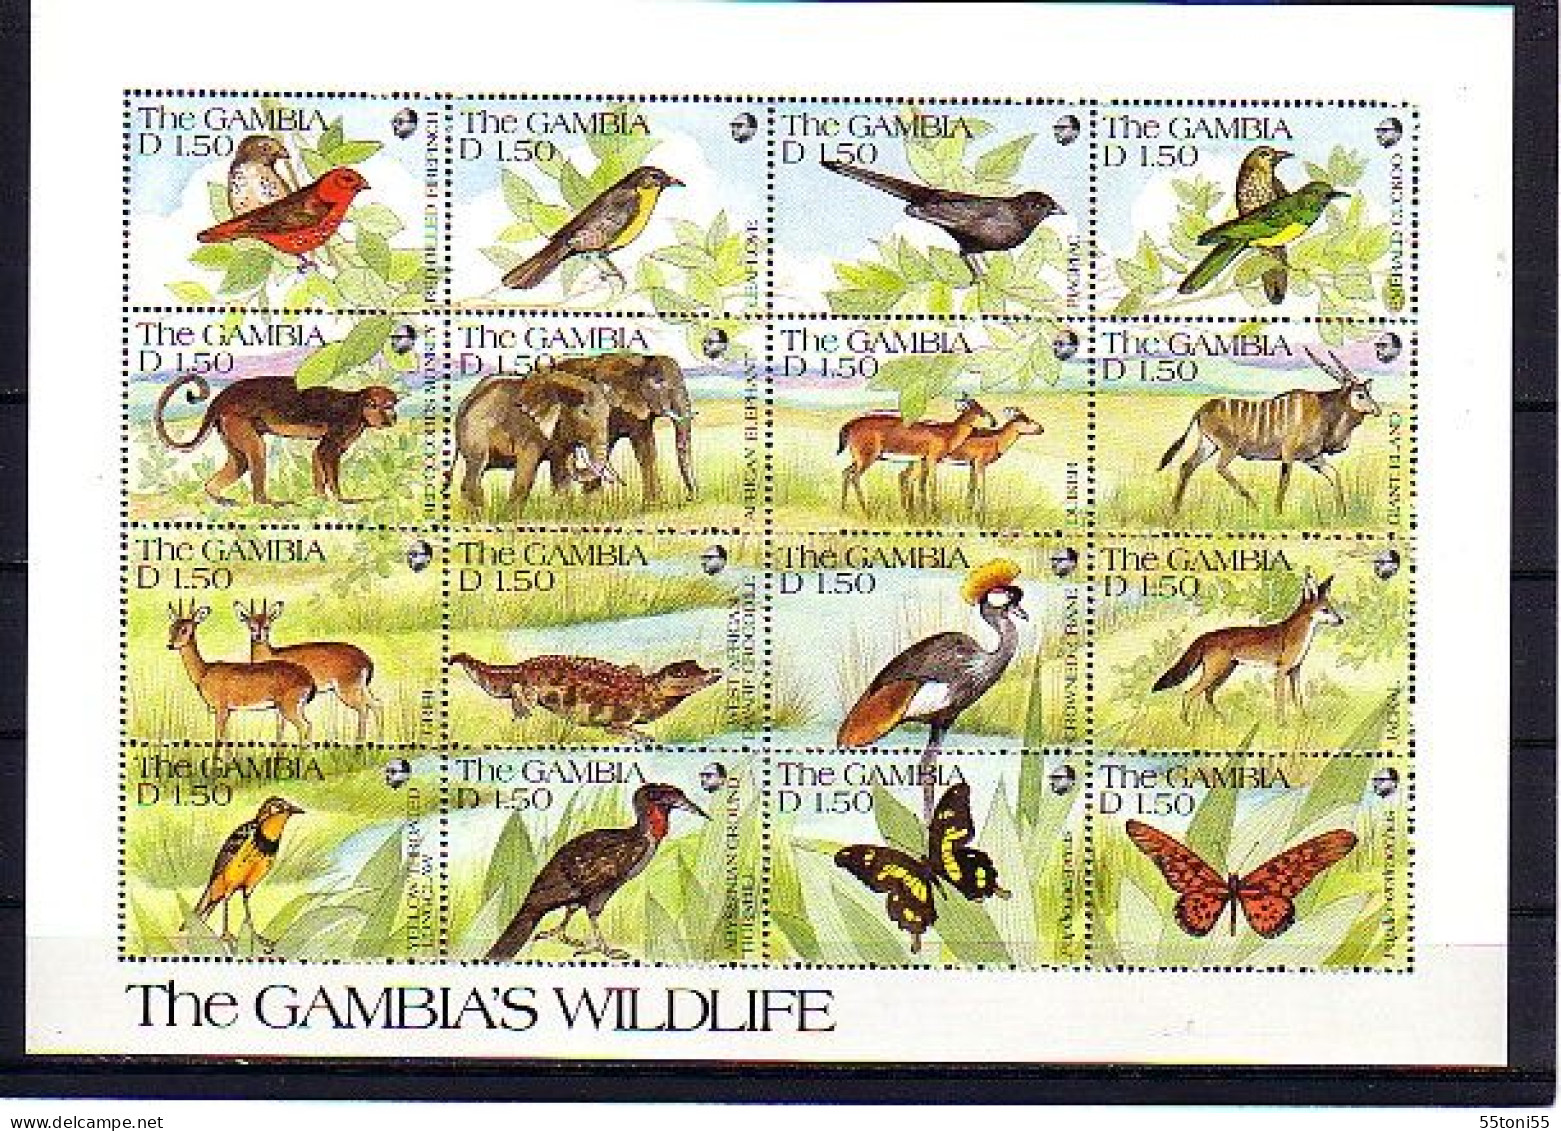 1991 Fauna  The GAMBIA'WILDLFF " 48 V.-MNH (3 S/M X16 V)  GAMBIA - Gambie (1965-...)